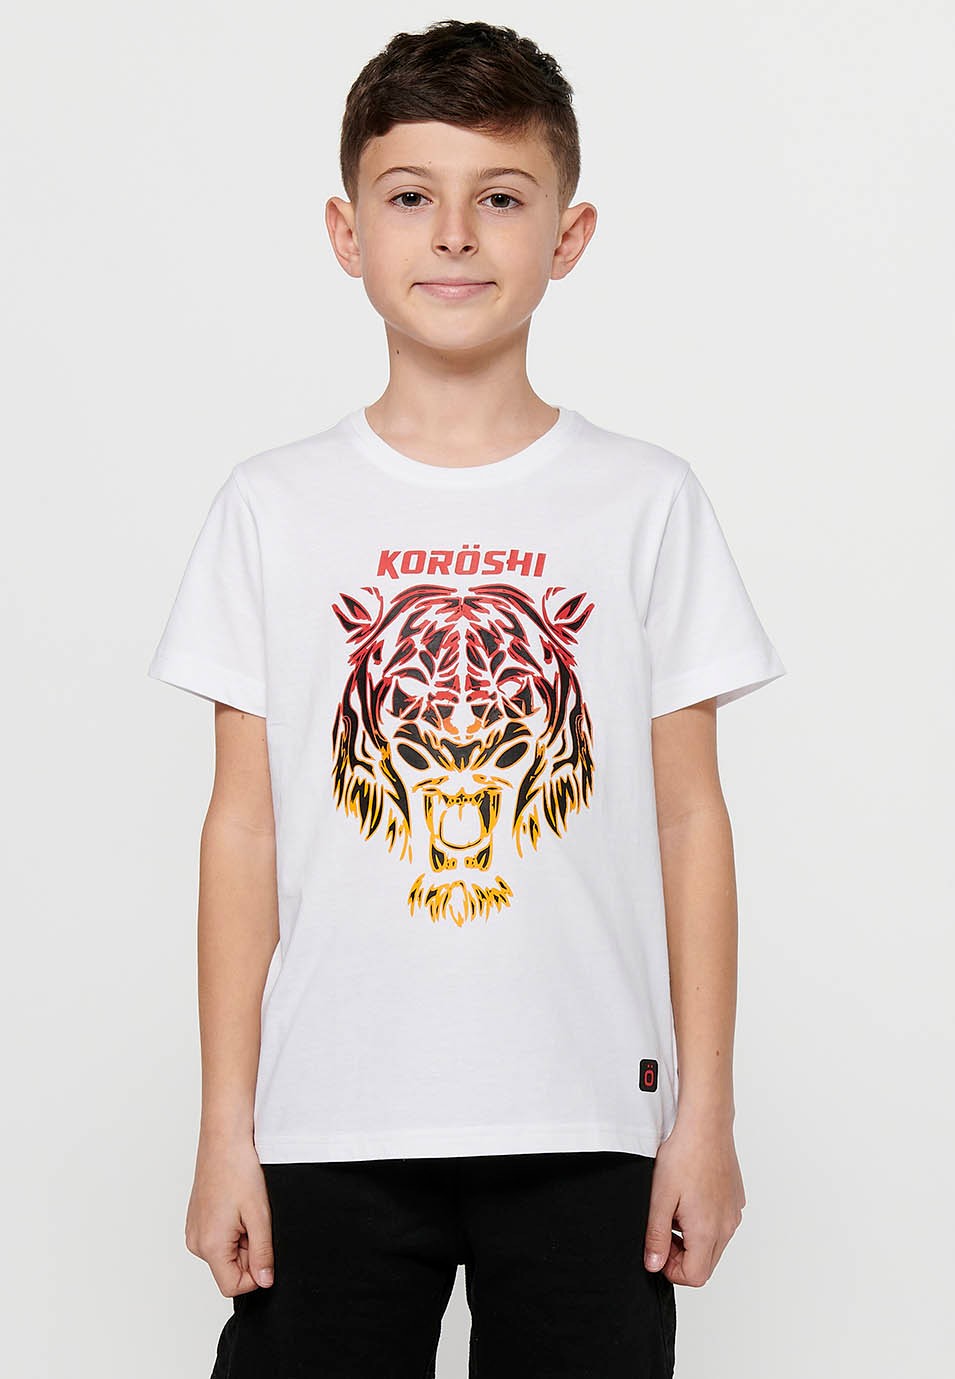 Short-sleeved cotton T-shirt with a round neckline. White front print for Boys